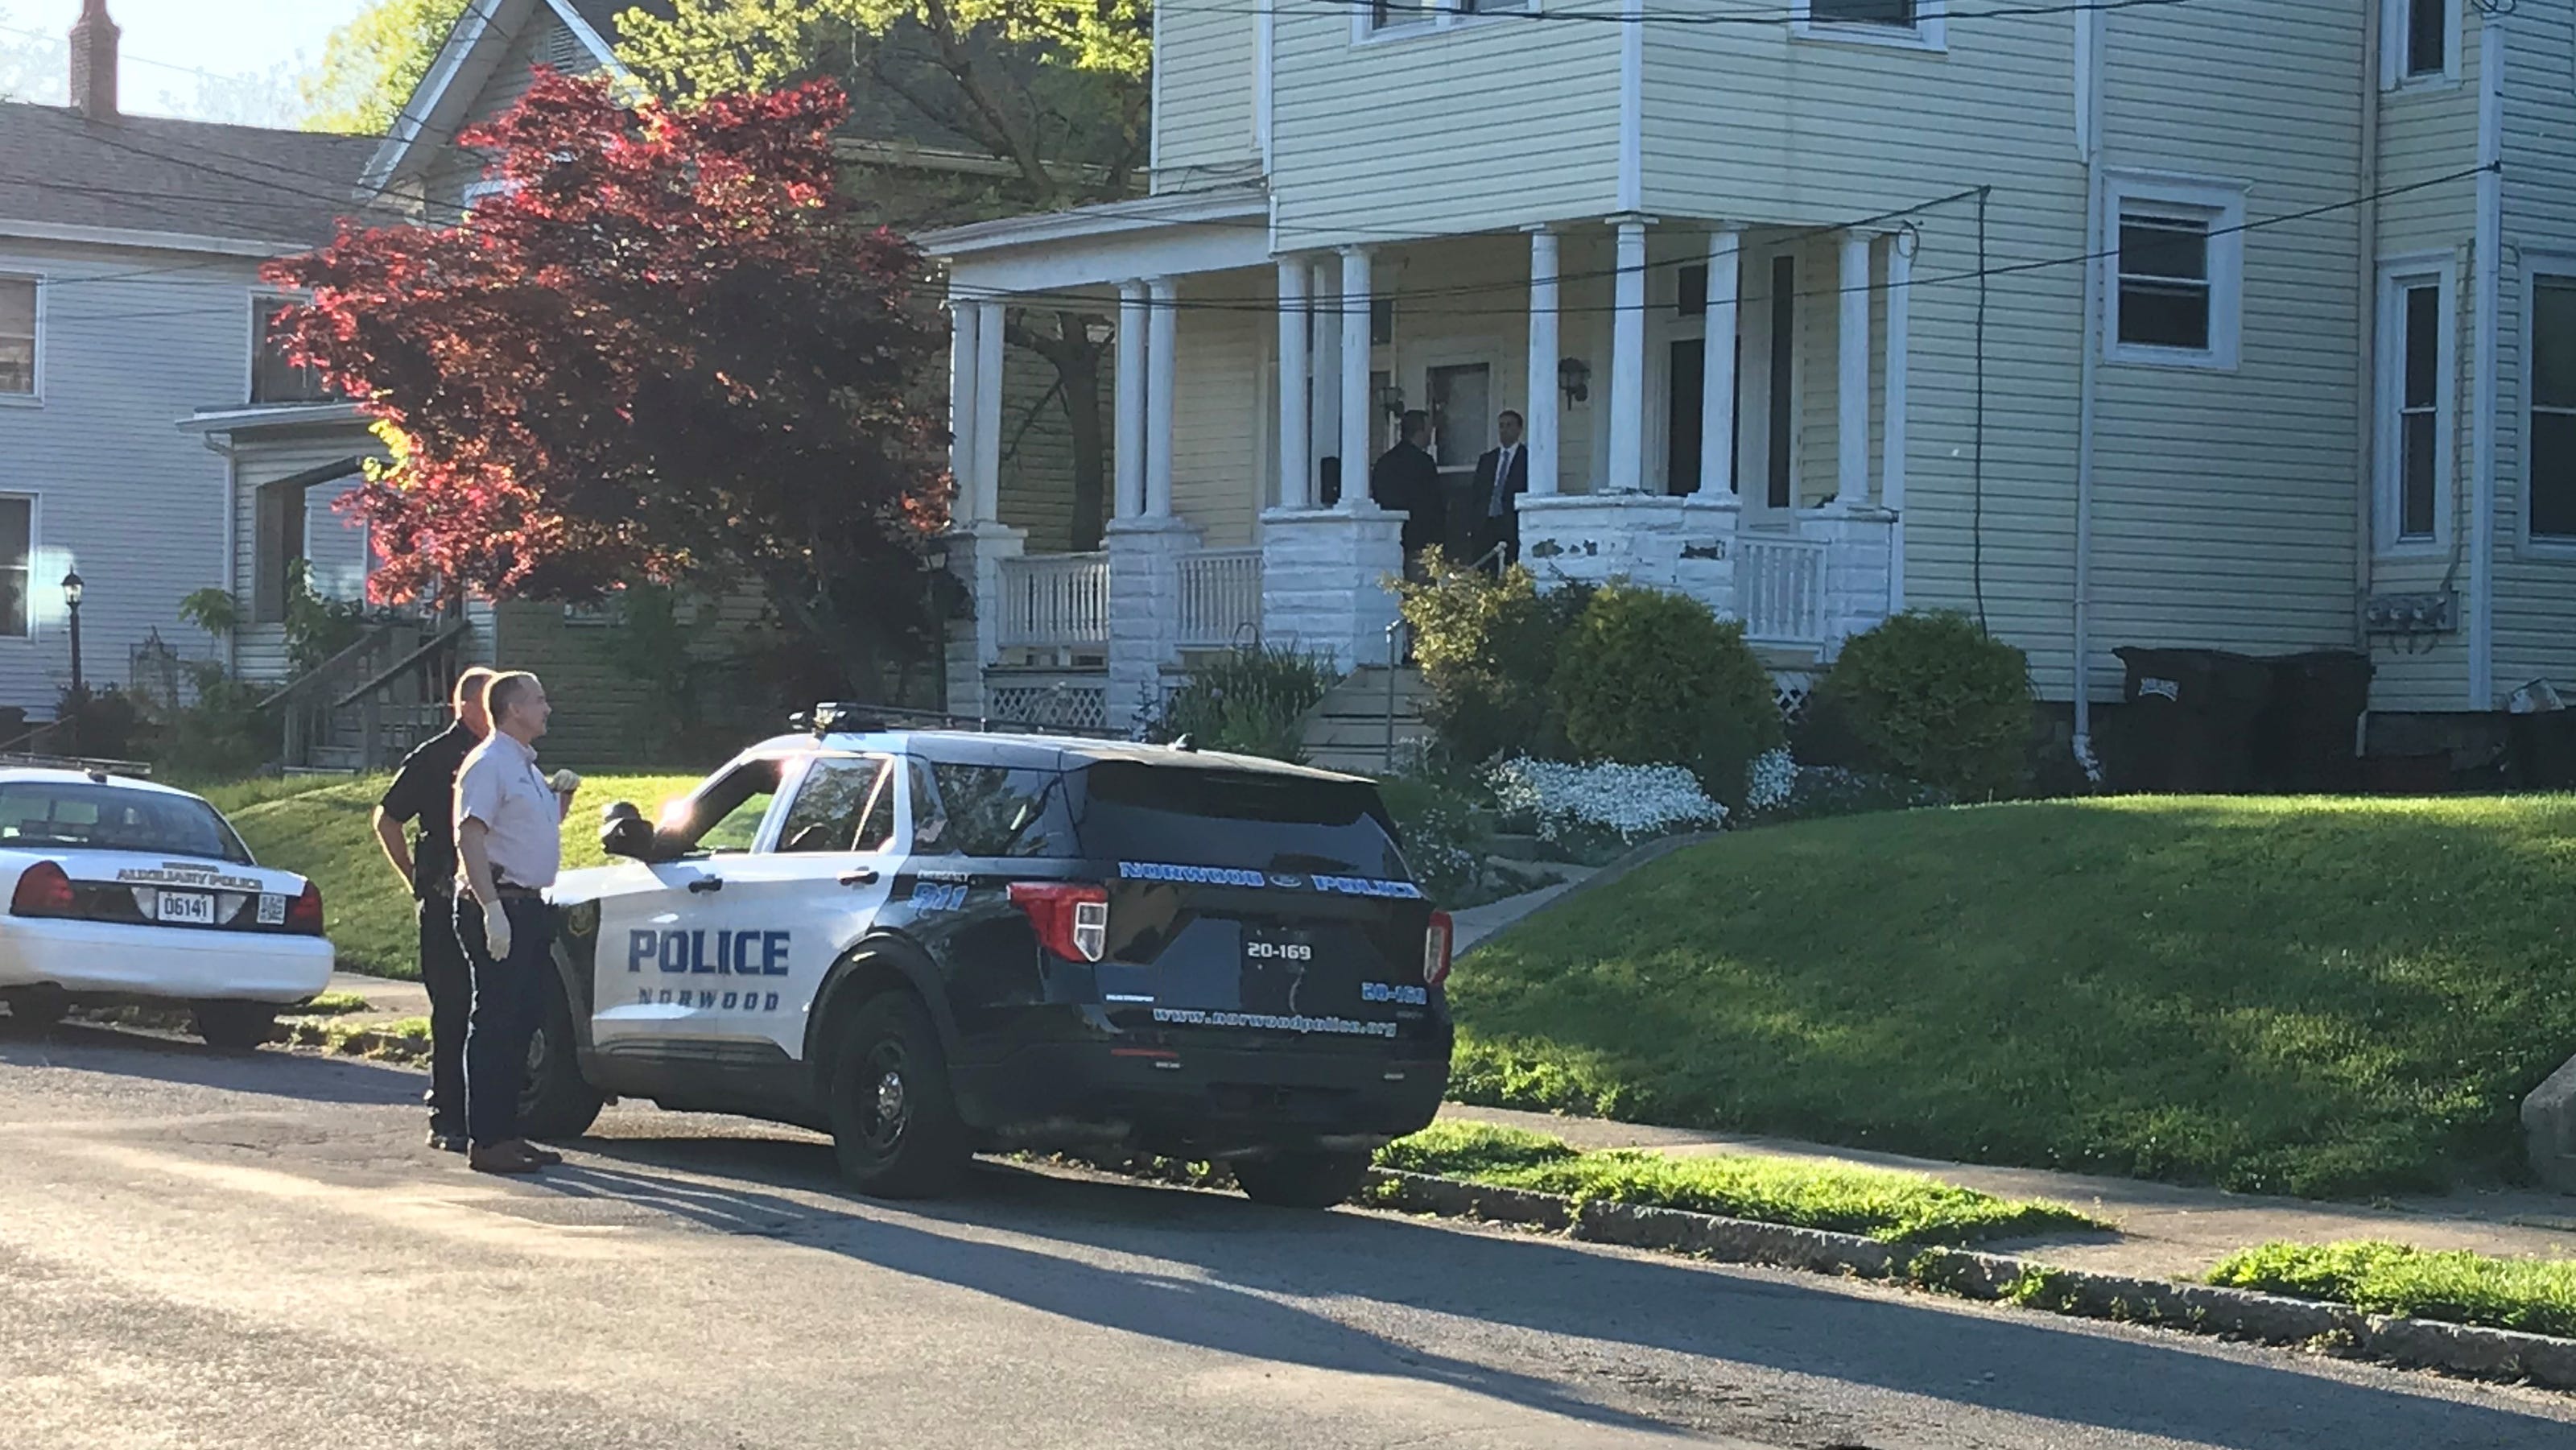  Police ID man found dead in Norwood residence after SWAT situation 